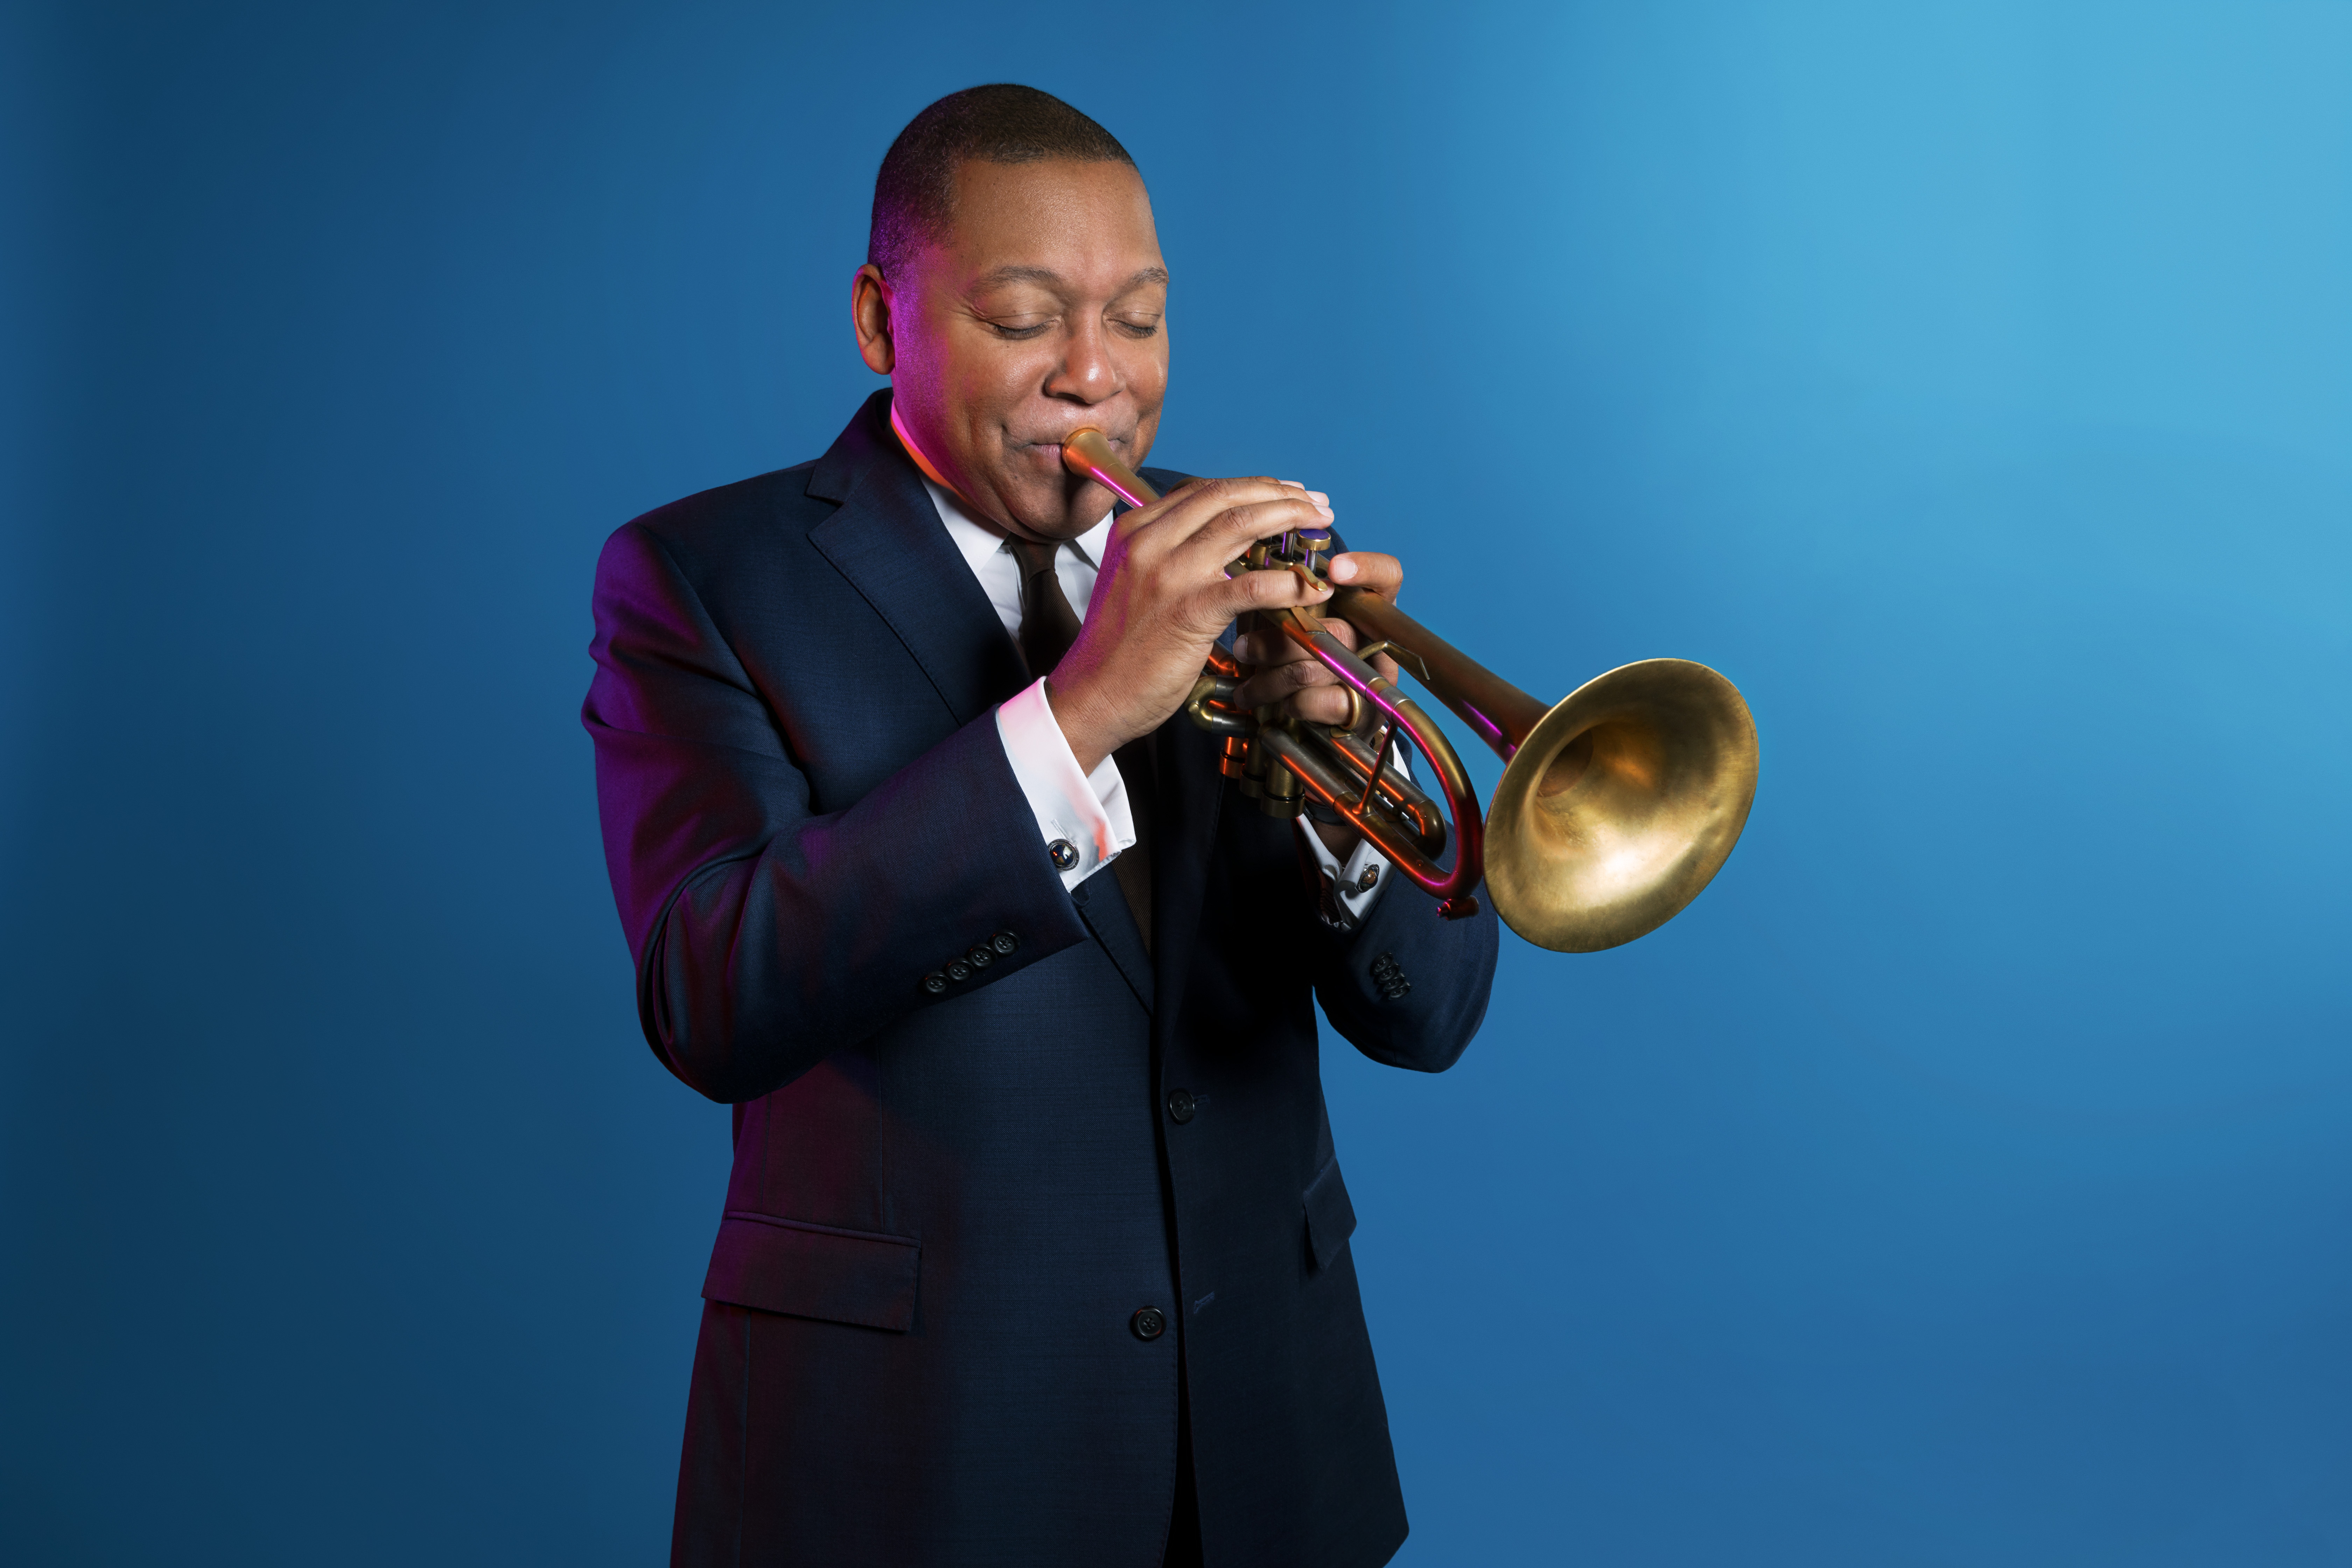 Wynton Marsalis, wearing a suit and playing a trumpet. Blue studio background 